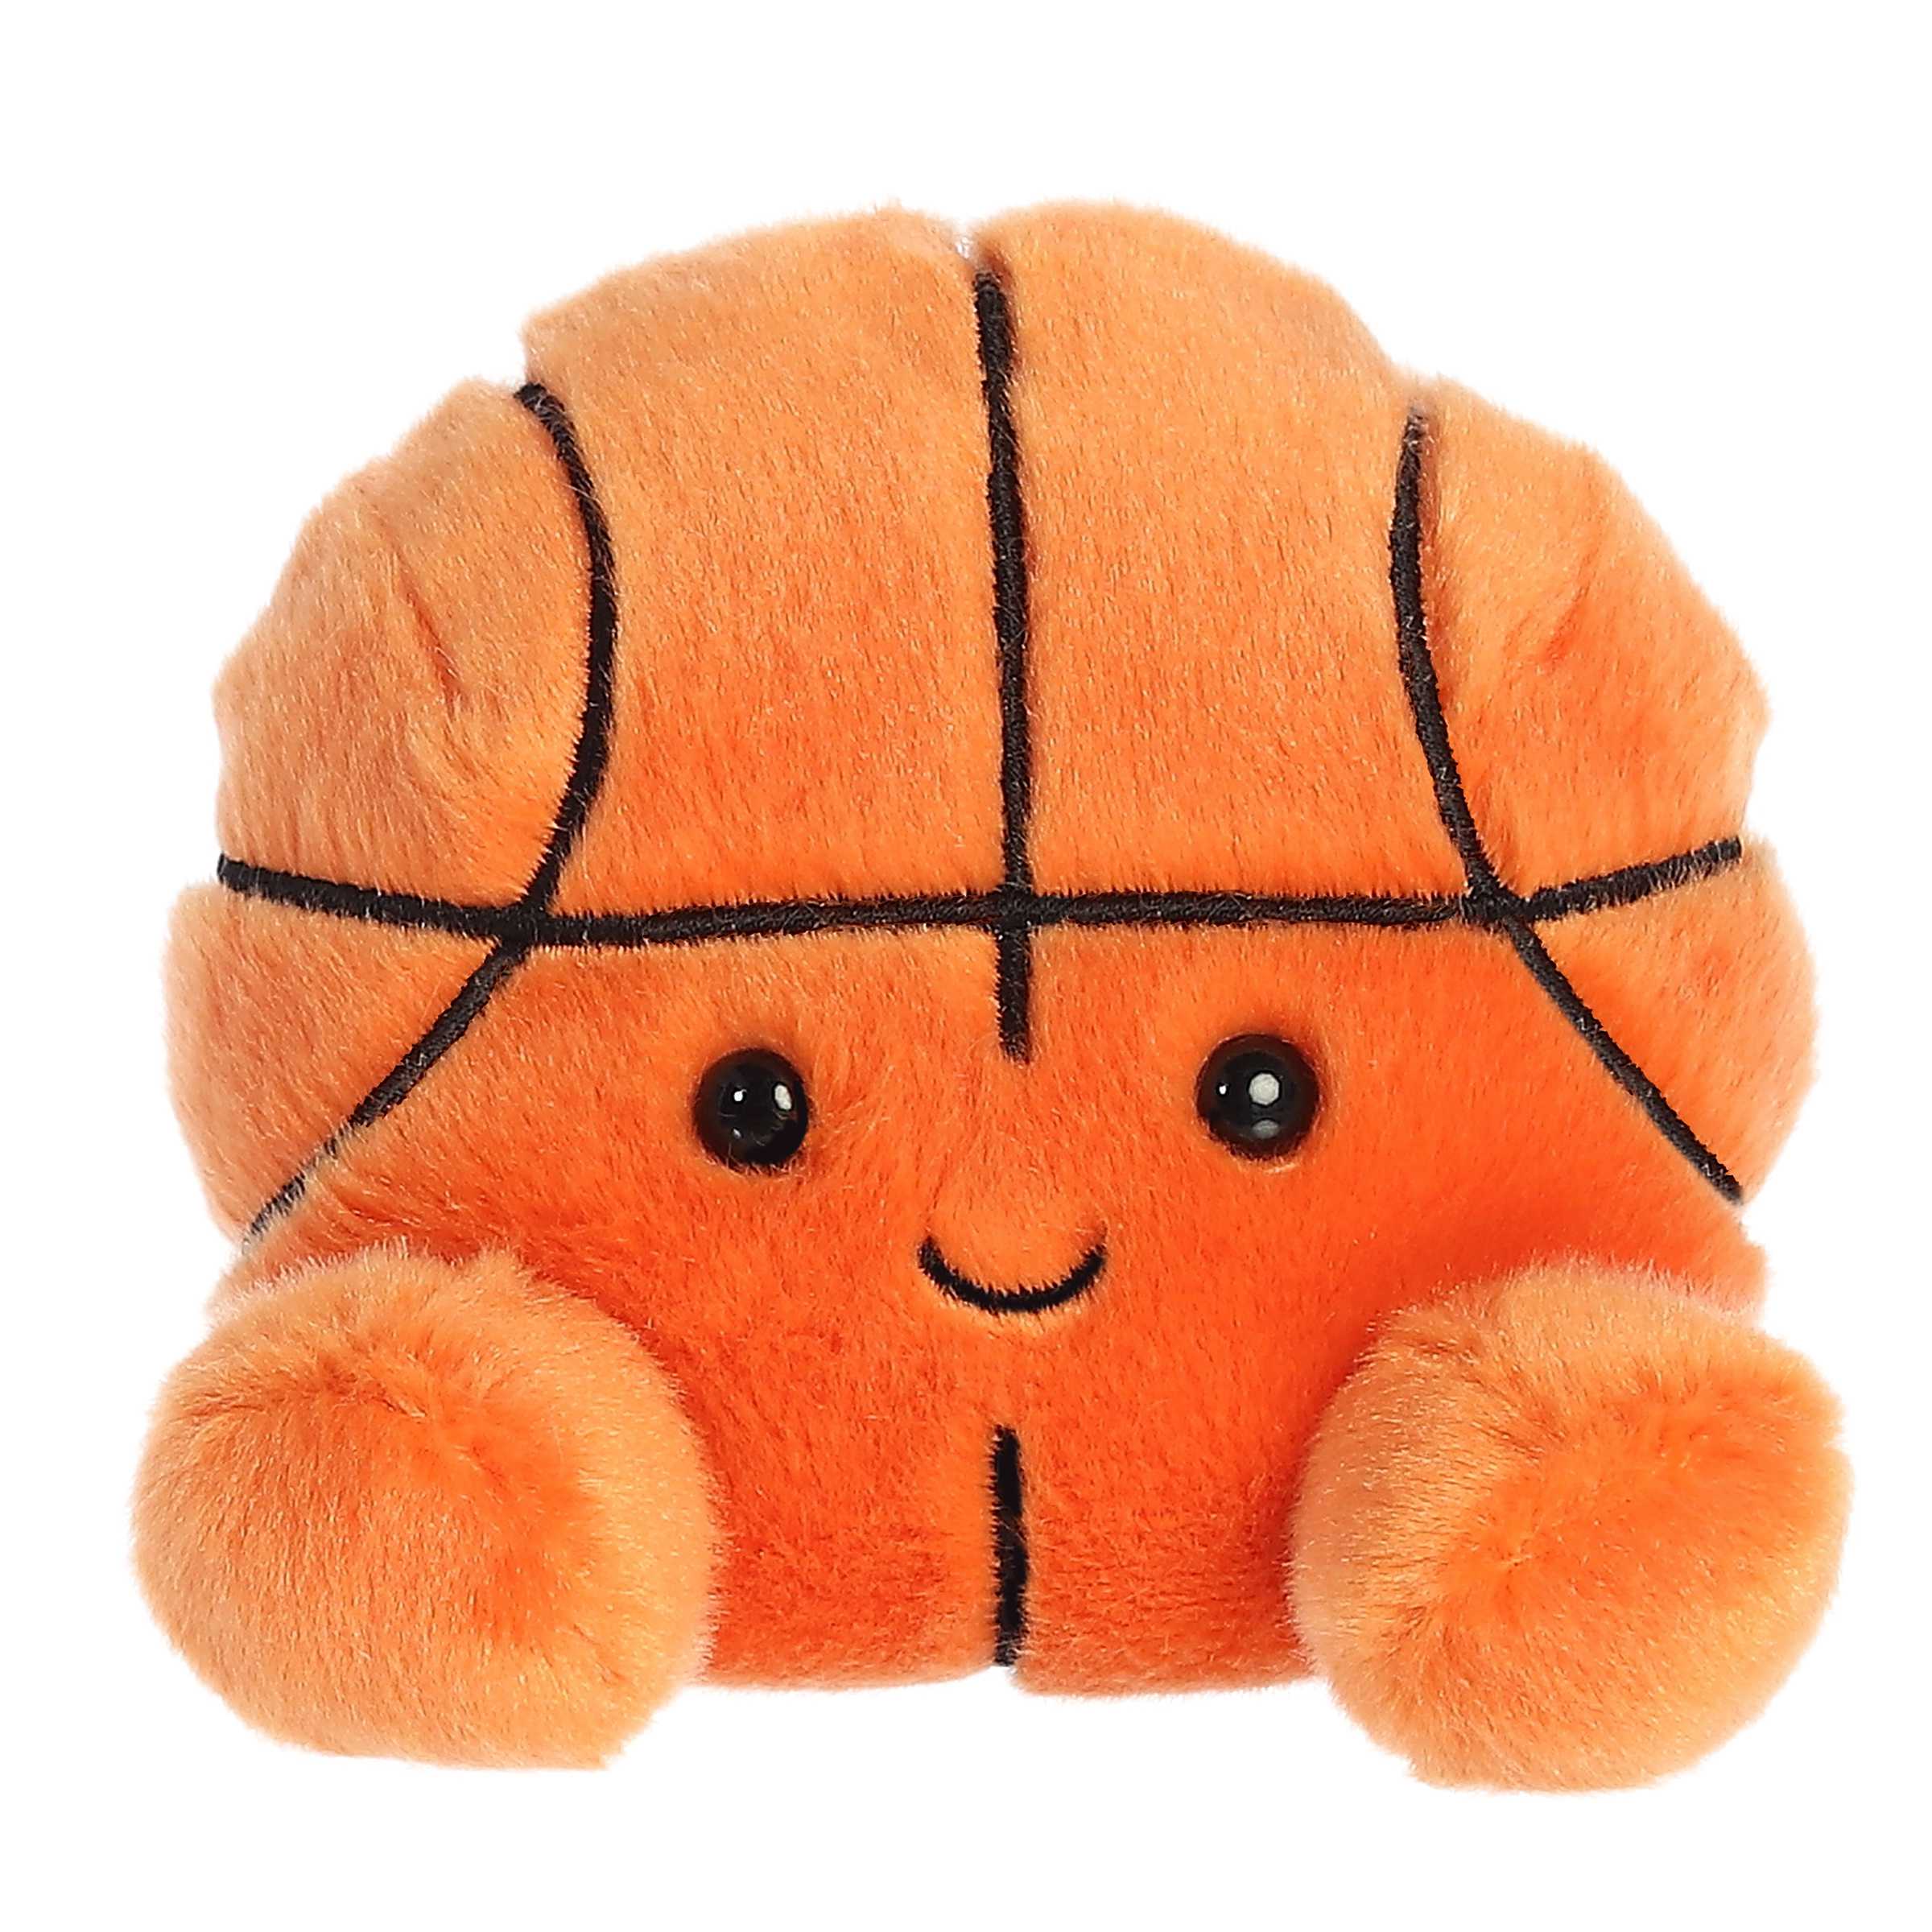 Hoops is a vibrant orange plush with black lines crisscrossing to mimic a basketball's segments, and her cheerful face!